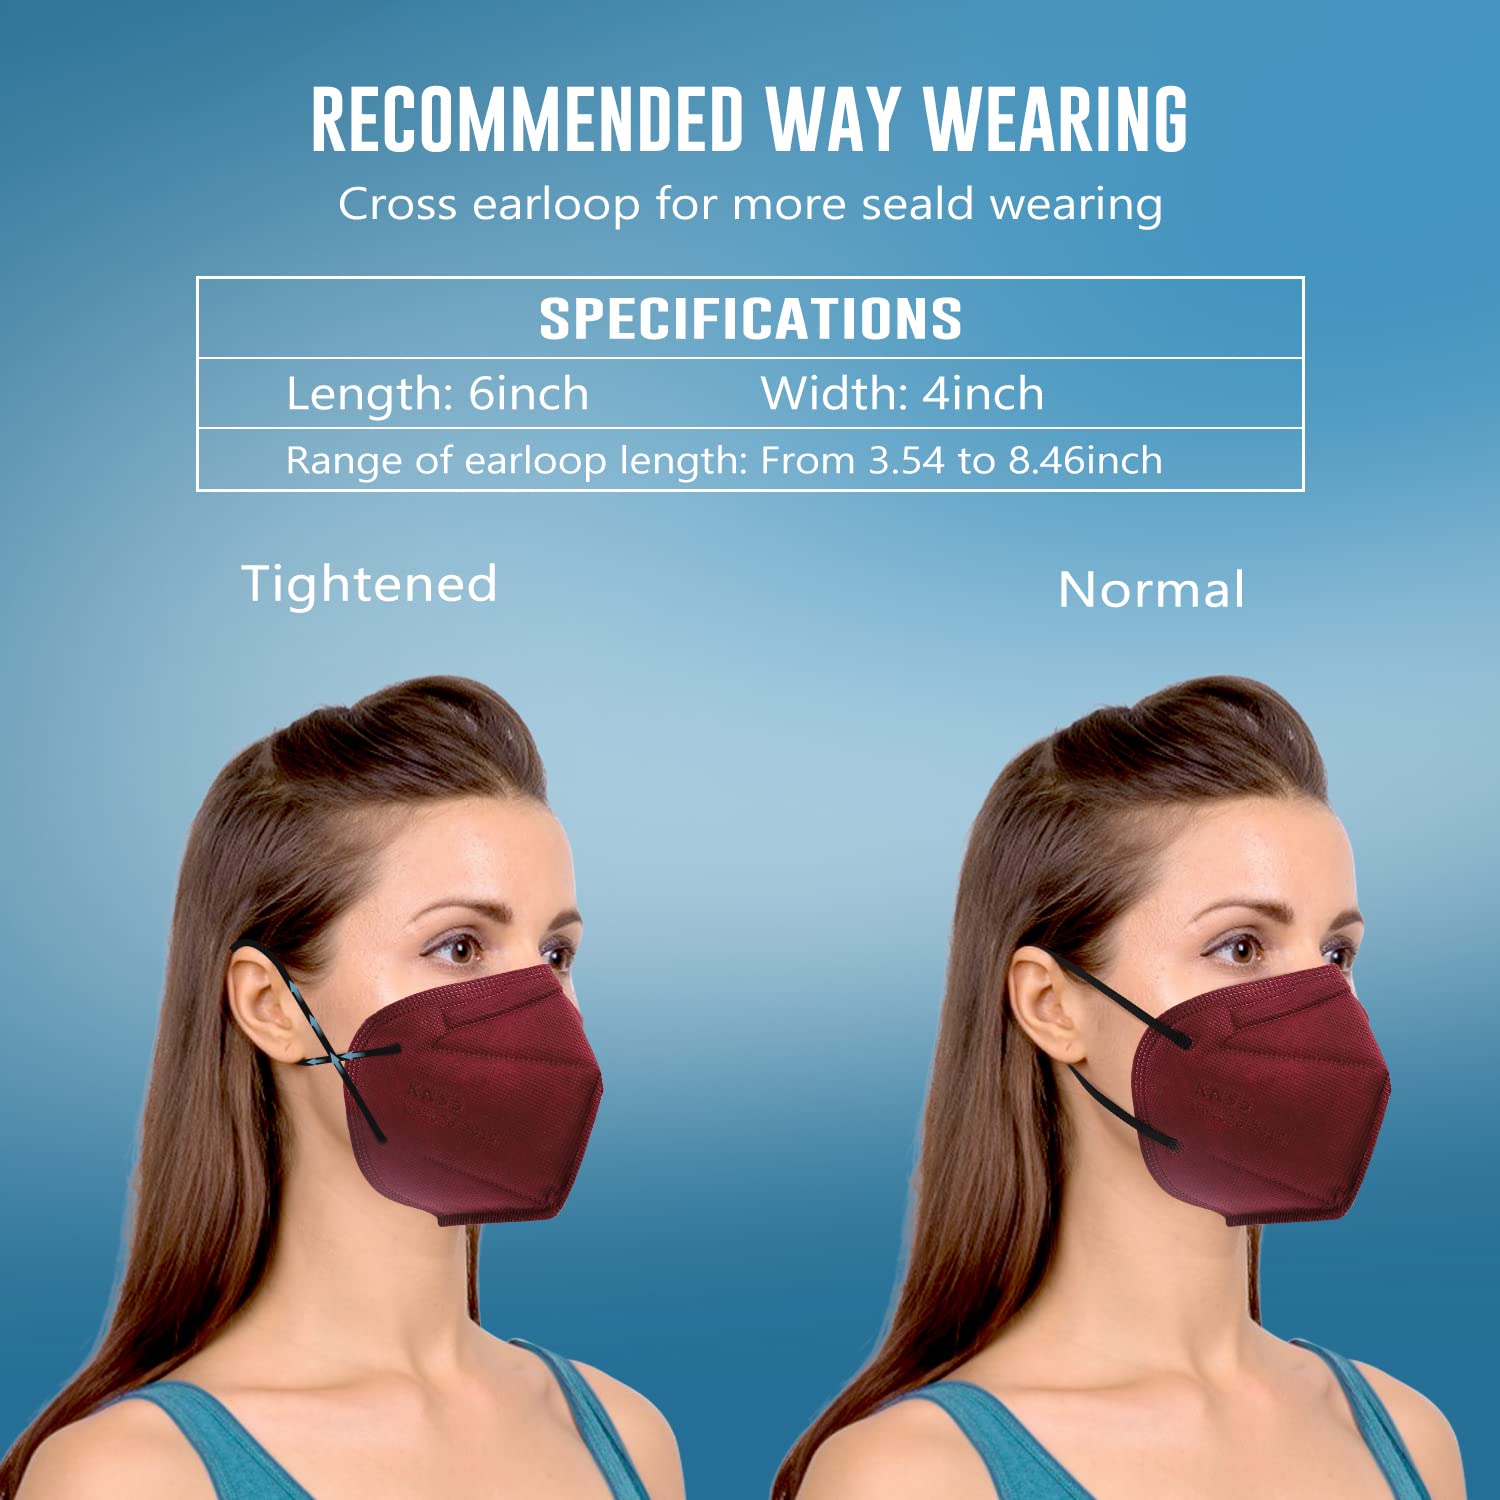 WWDOLL KN95 Face Mask 50 PCs, Multiple Colour 5 Layers KN95 Masks, Disposable Respirator Protection Mask for Men and Women(Pink, Blue, Grey, Red, Purple)